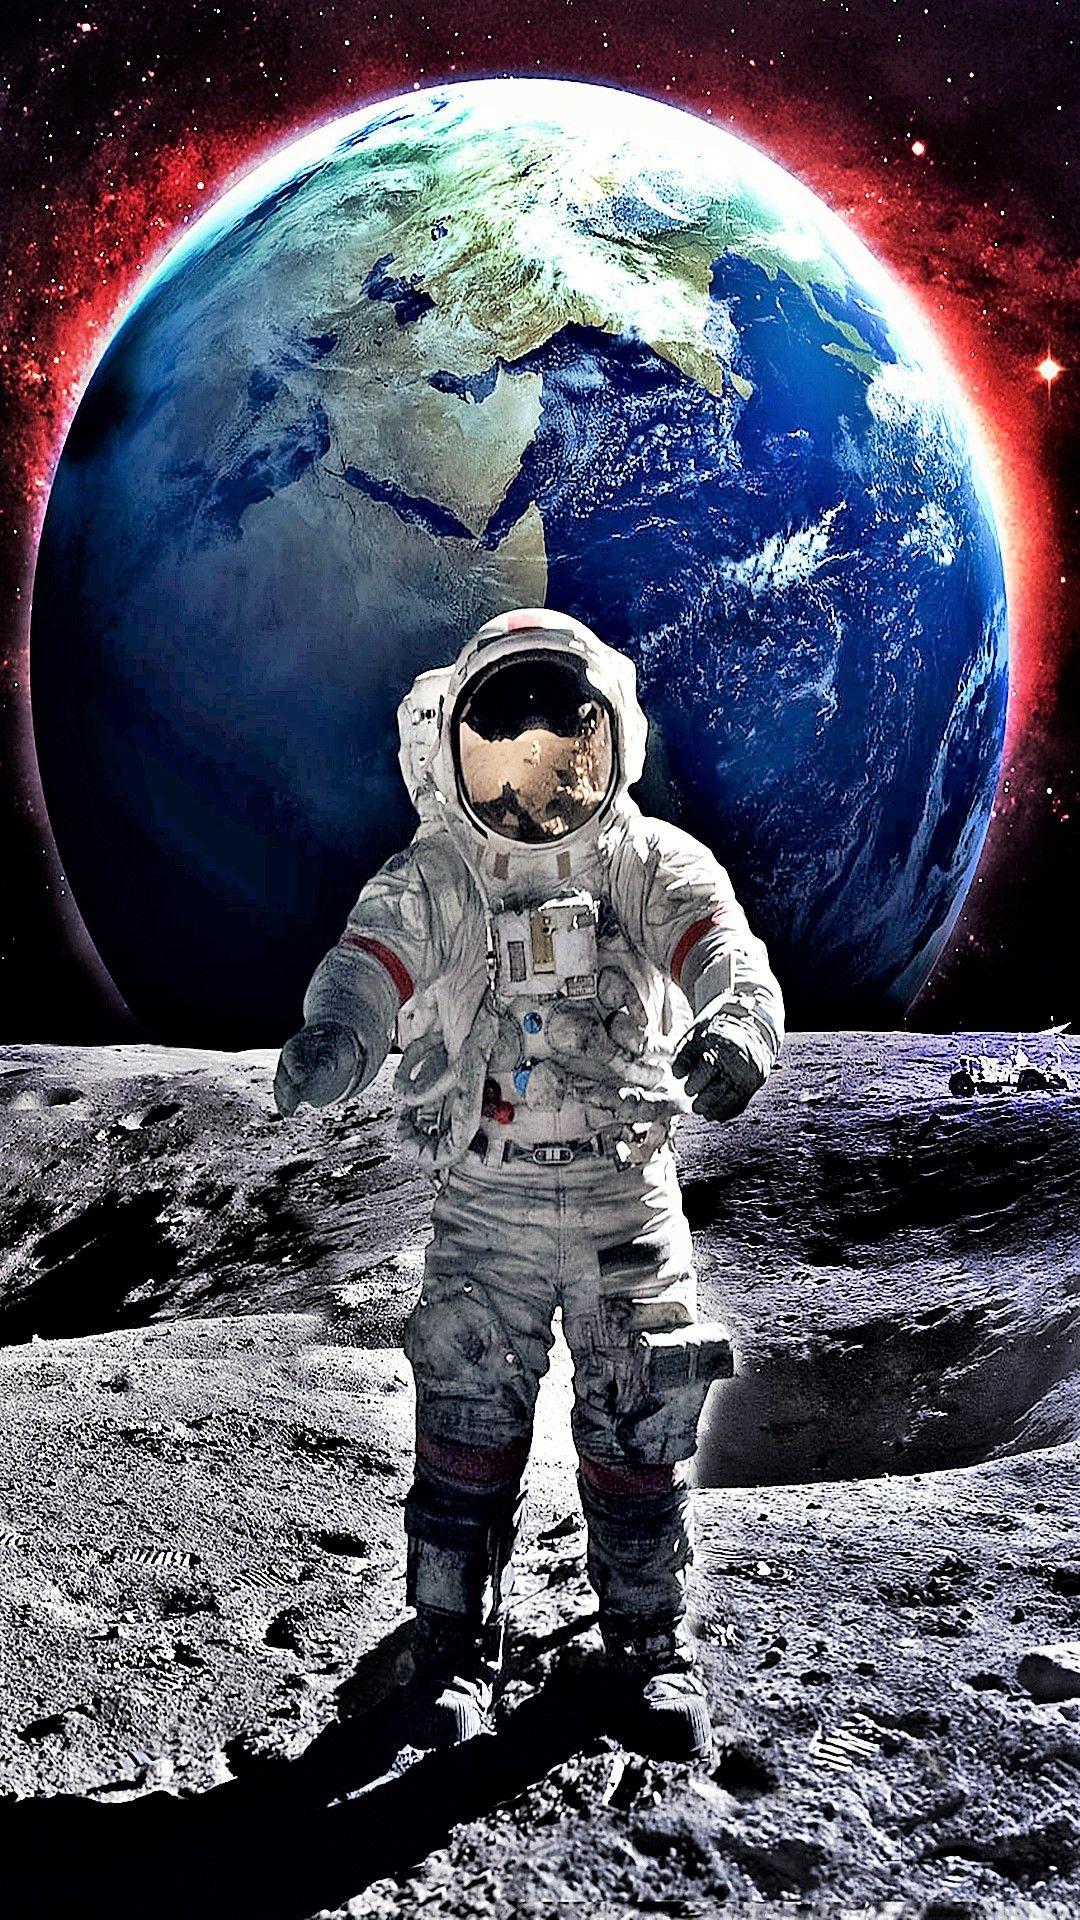 Moon earth astronaut to see more beautiful galactical space wallpaper! - Astronaut wallpaper, Space artwork, Astronaut art